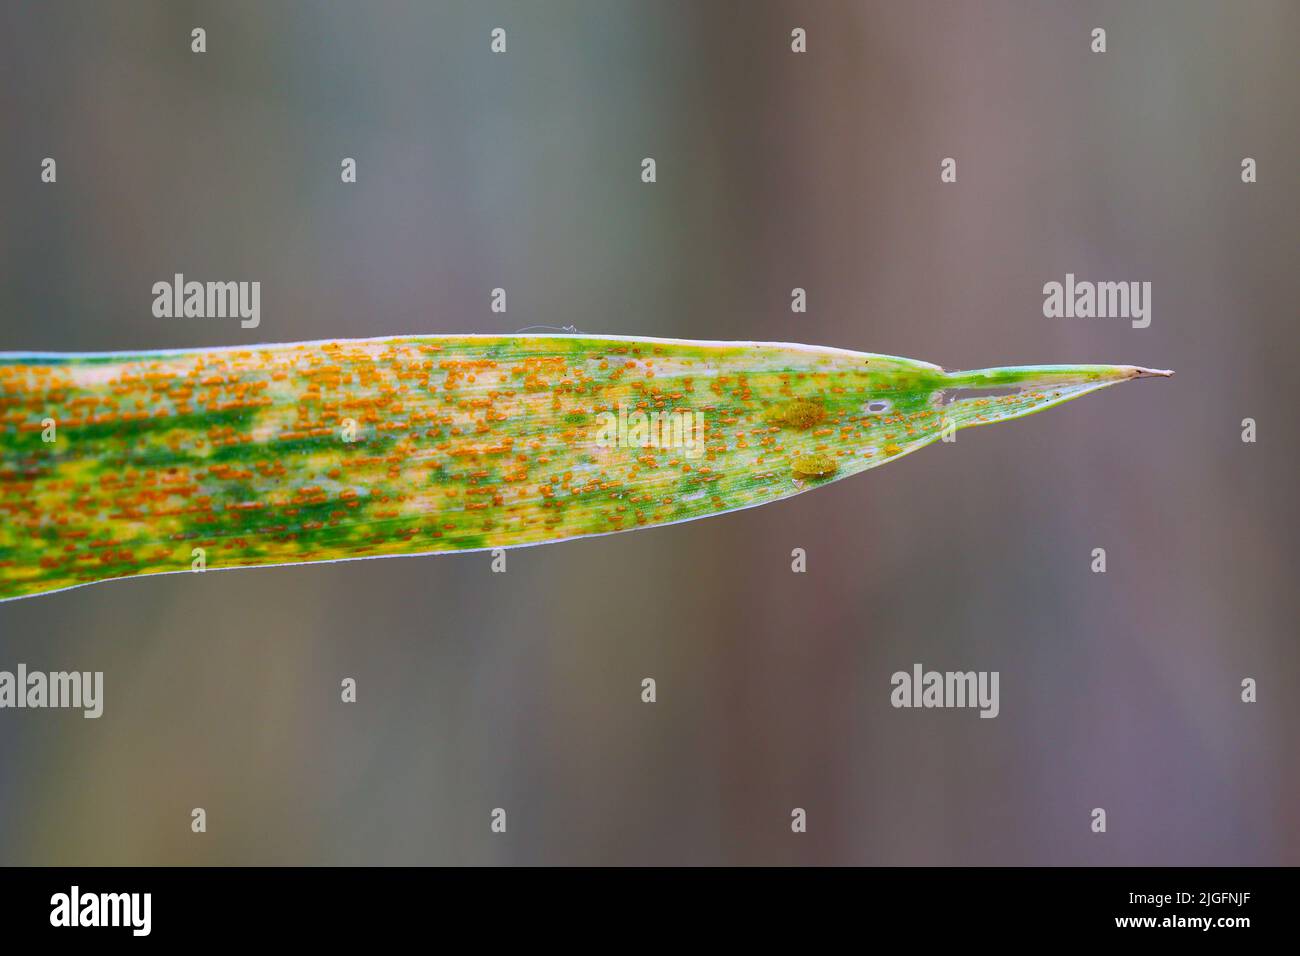 Aphids and fungal disease symptoms on a cereal leaf. Stock Photo